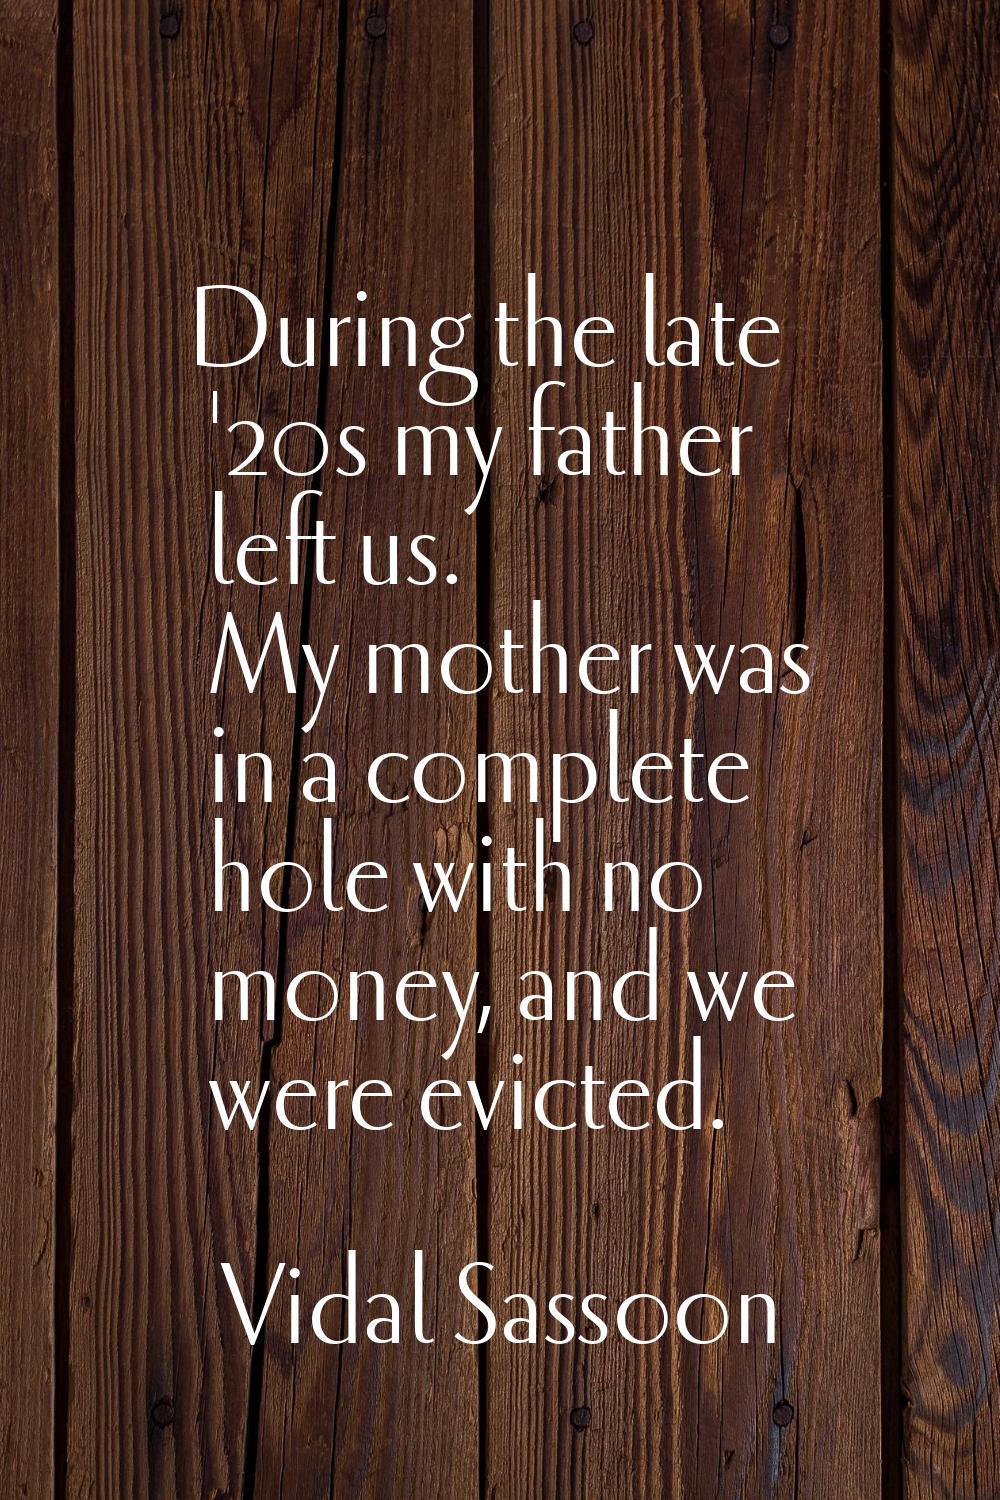 During the late '20s my father left us. My mother was in a complete hole with no money, and we were